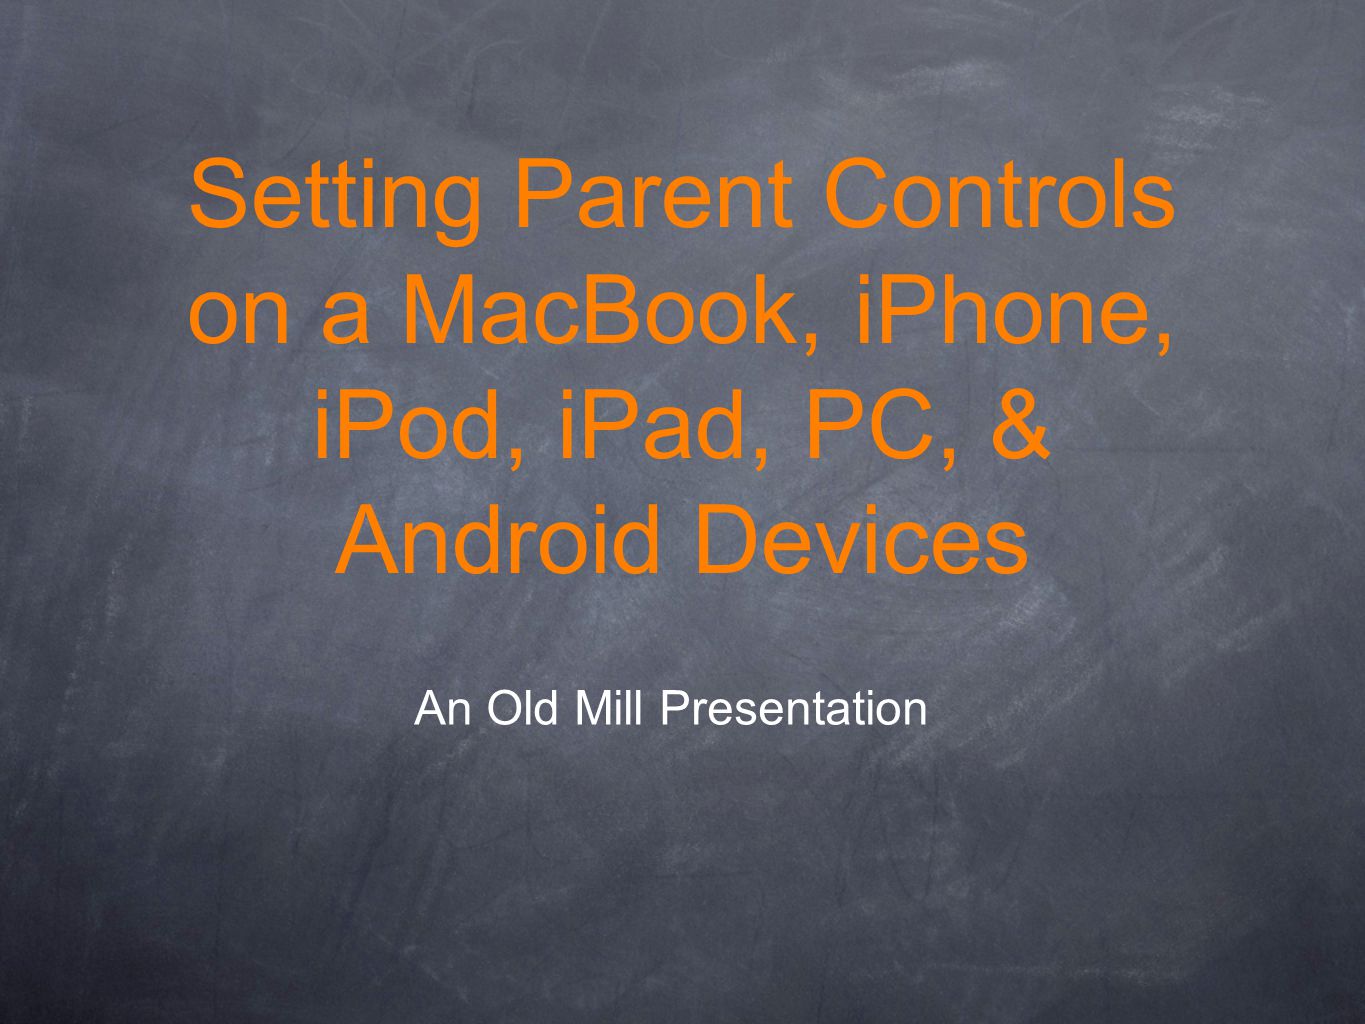 Setting Parent Controls on a MacBook, iPhone, iPod, iPad, PC, & Android Devices An Old Mill Presentation